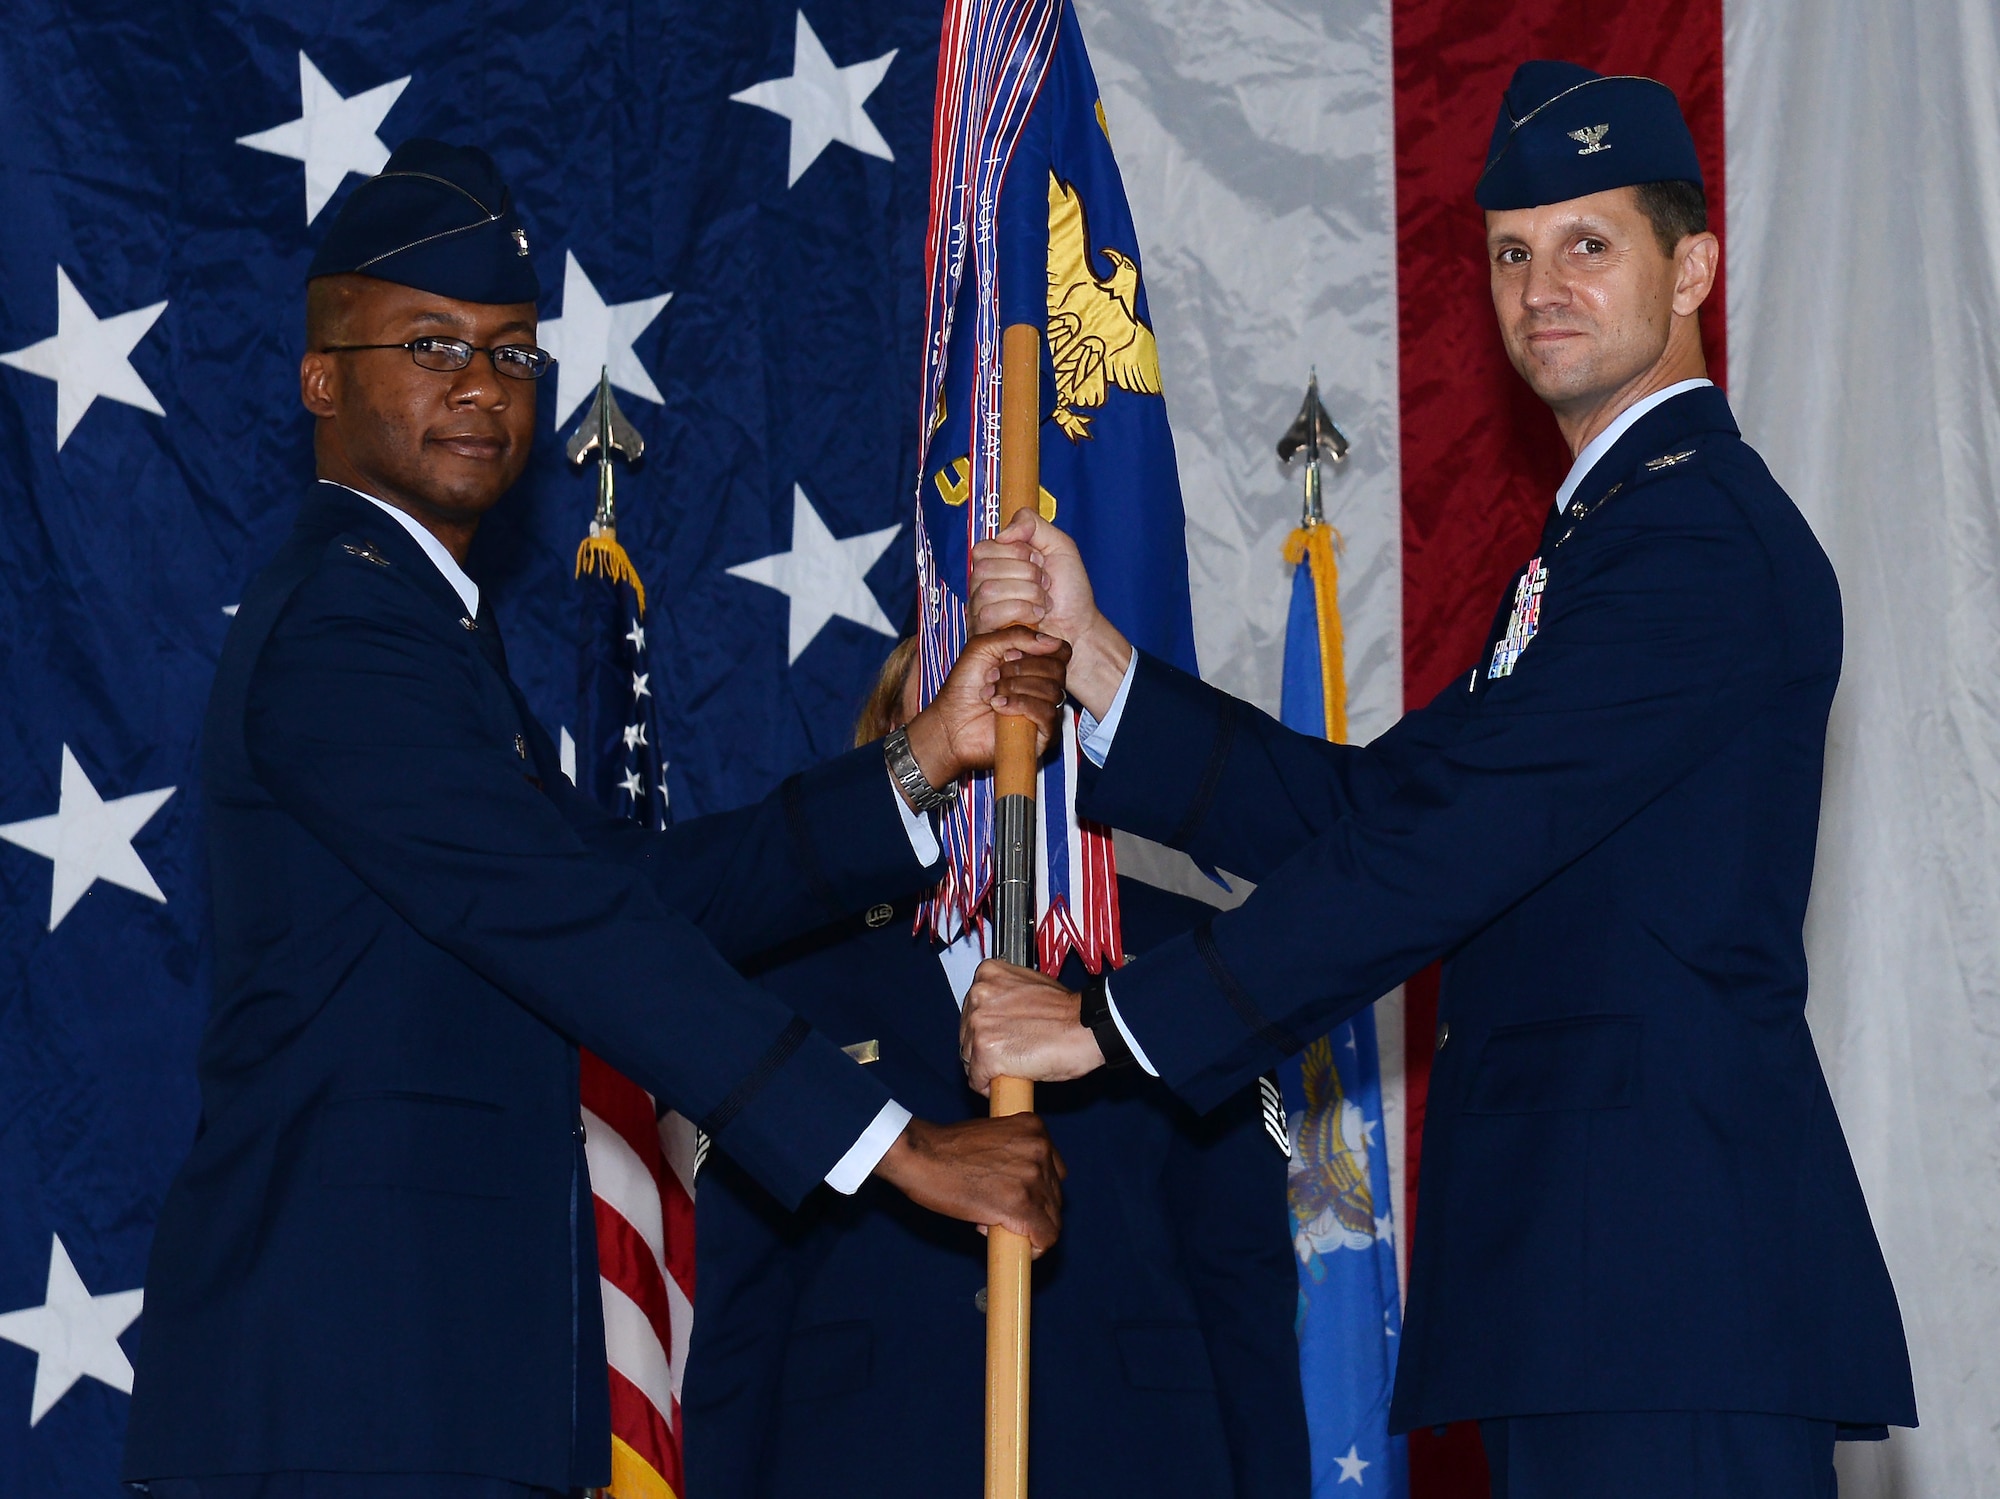 Col. Gavin Marks, 55th Wing commander, passes the 55th Mission Support Group guidon to Col. W.R. Alan Dayton, during the 55th Mission Support Group Change of Command ceremony July 24, 2019, inside the Offutt Air Force Base Fire Station. Col. W.R. Alan Dayton took over command of the 55th MSG from Col. J. David Norton who has served in the position since 2017.